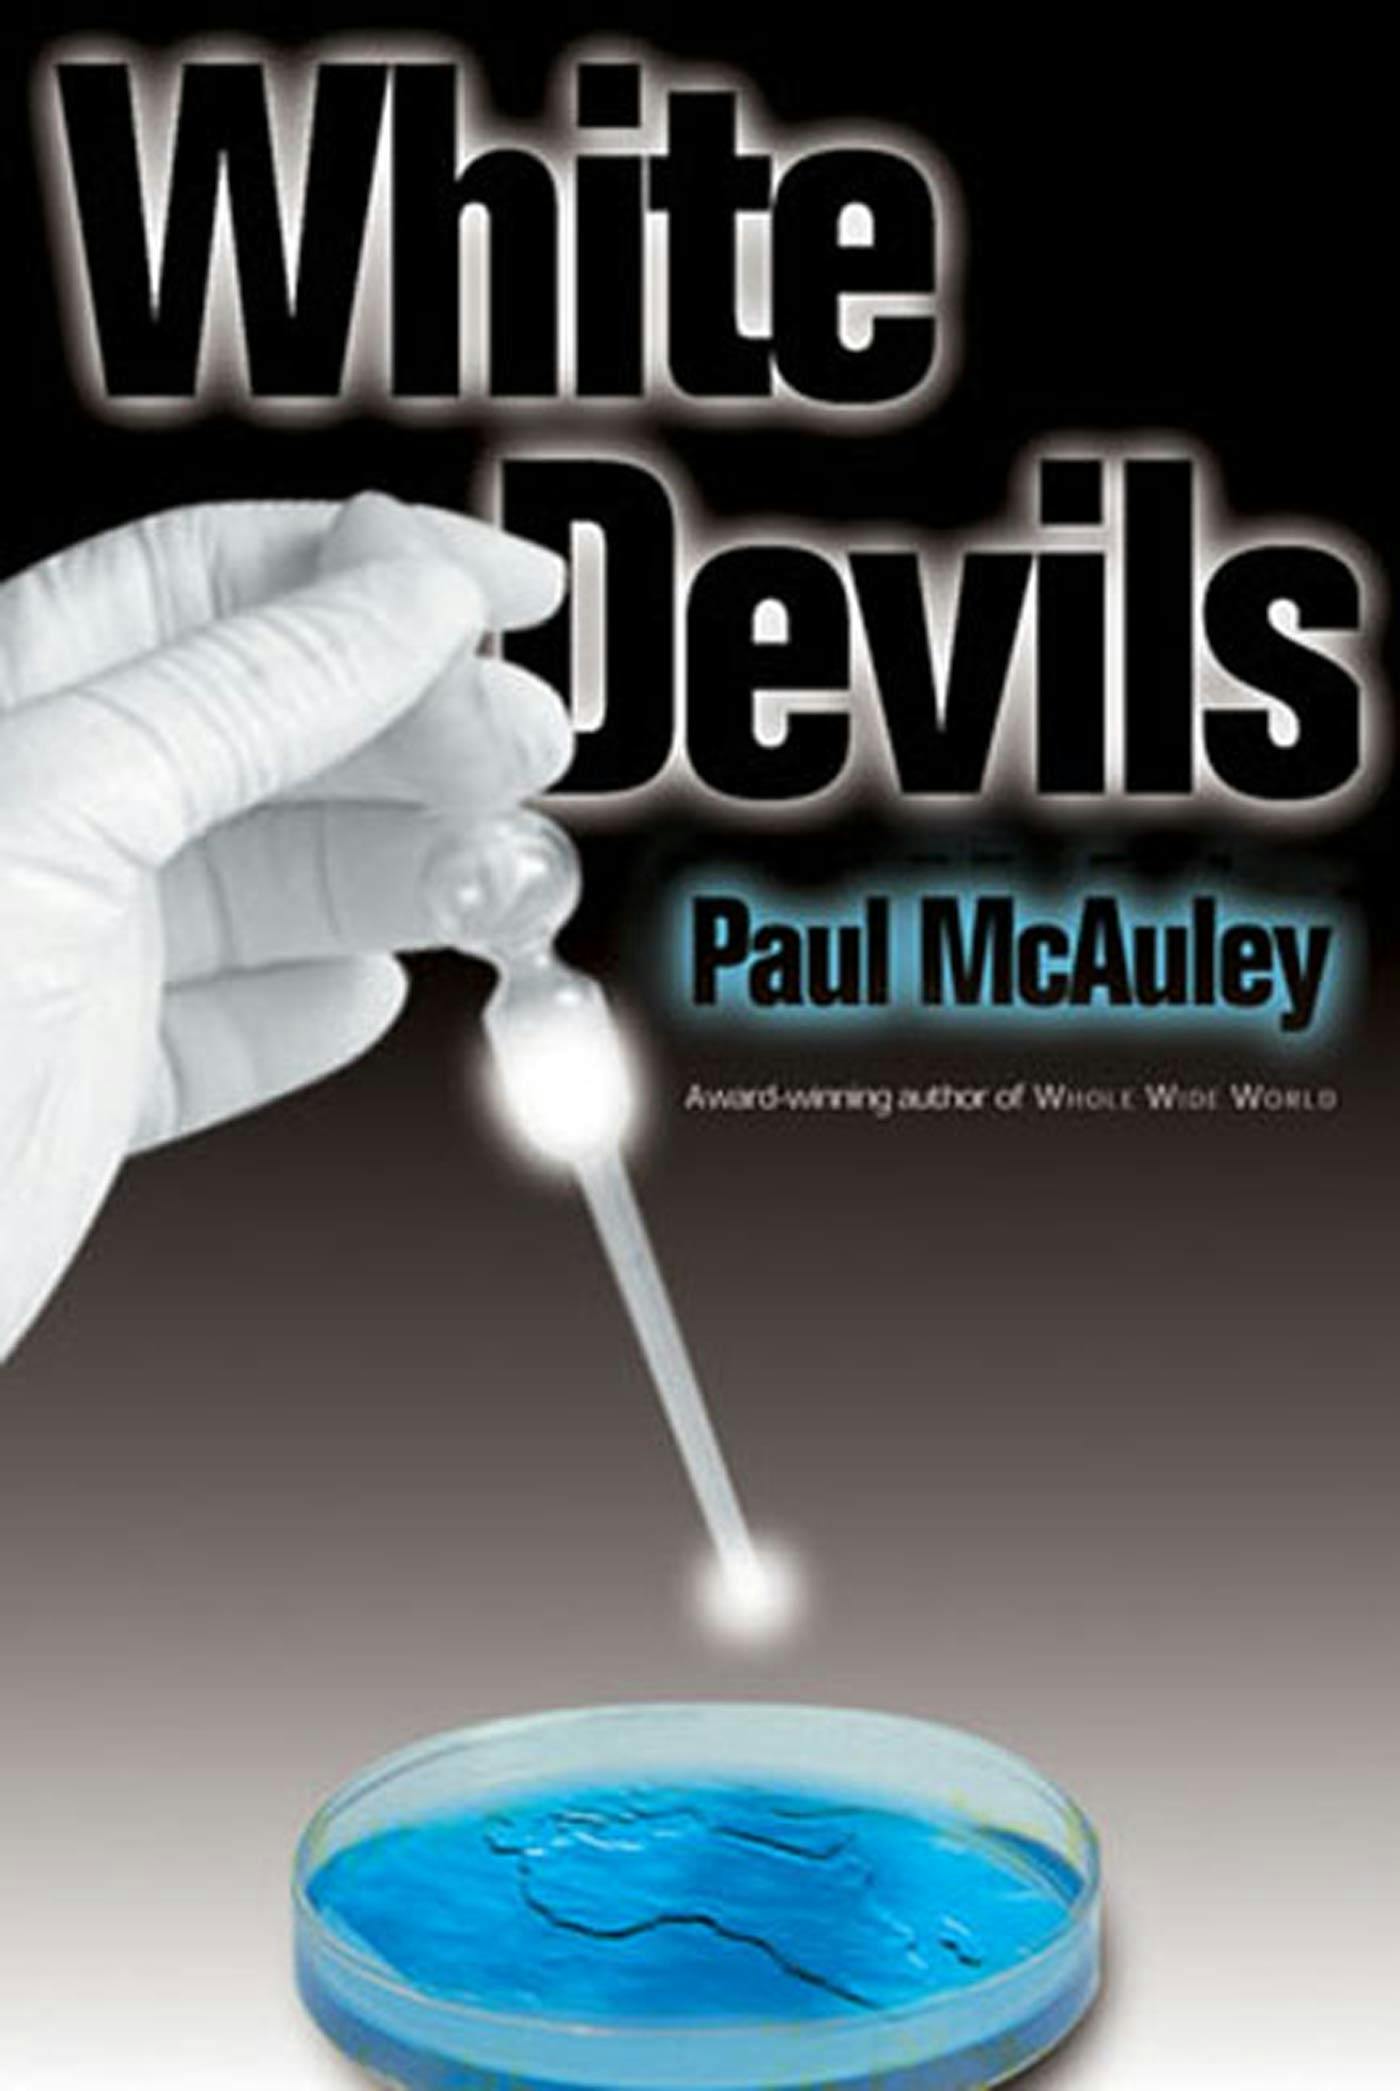 Cover for the book titled as: White Devils